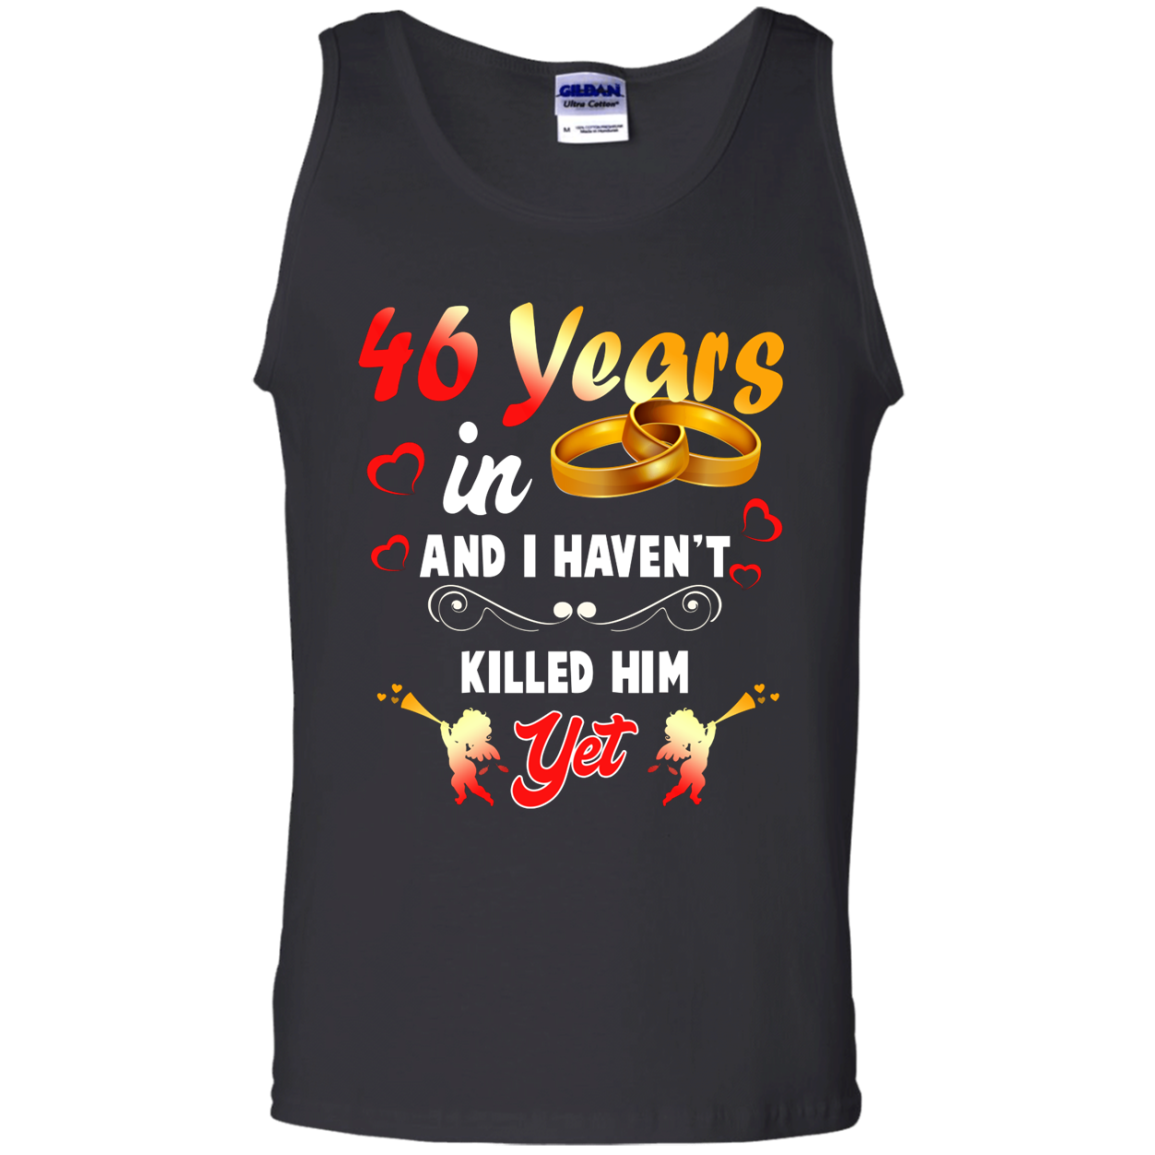 Order Funny 46 Years Wedding Anniversary Shirt For Husband And Wife Tank Top